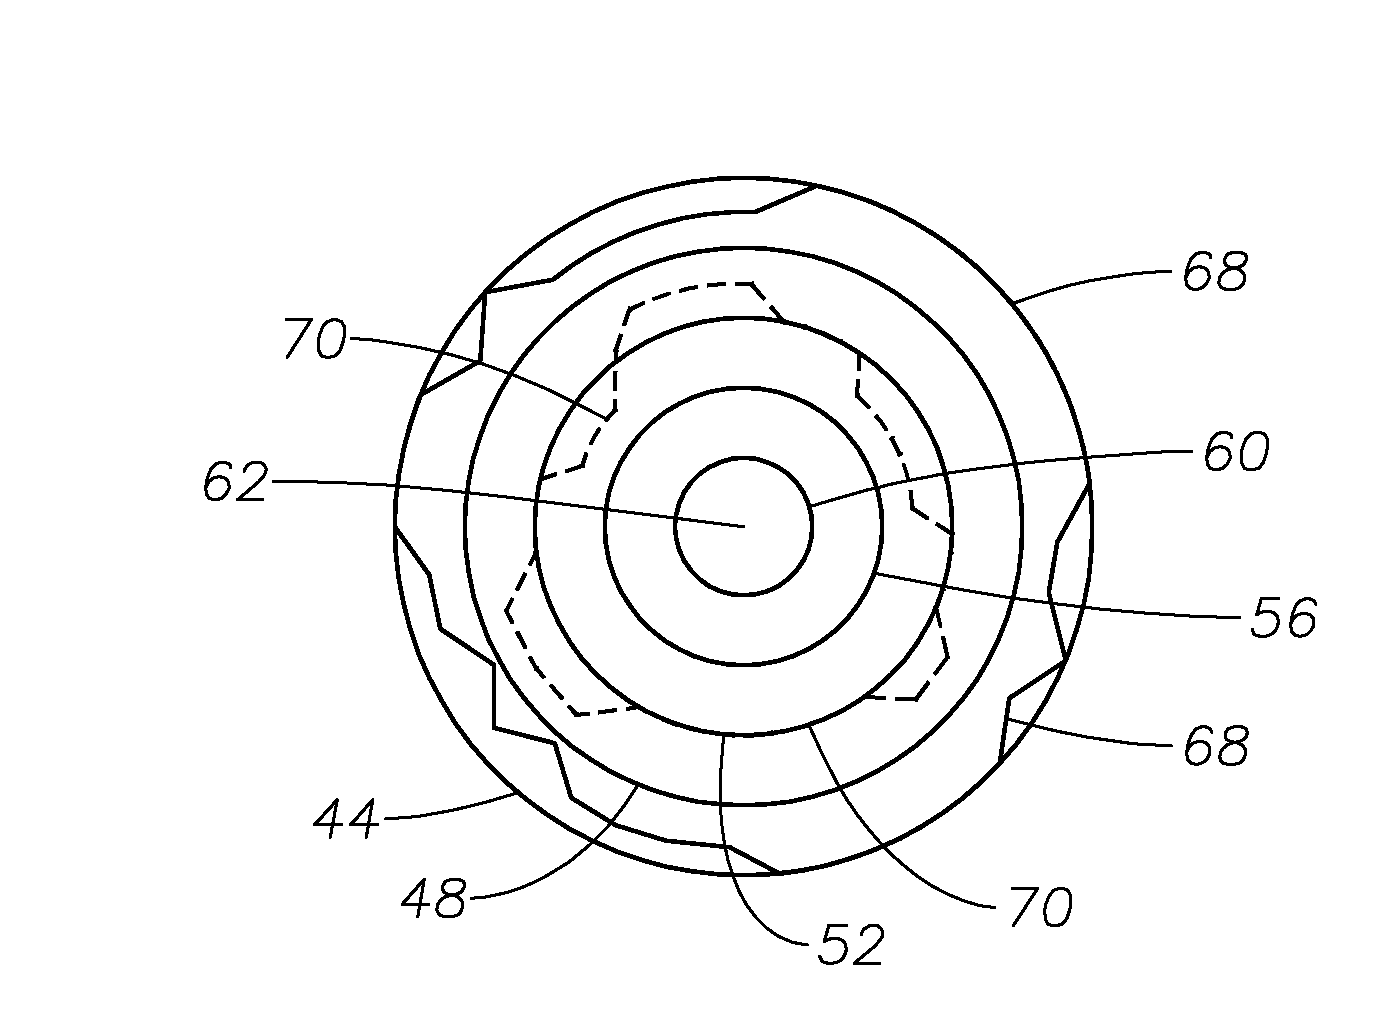 Representation of whirl in fixed cutter drill bits